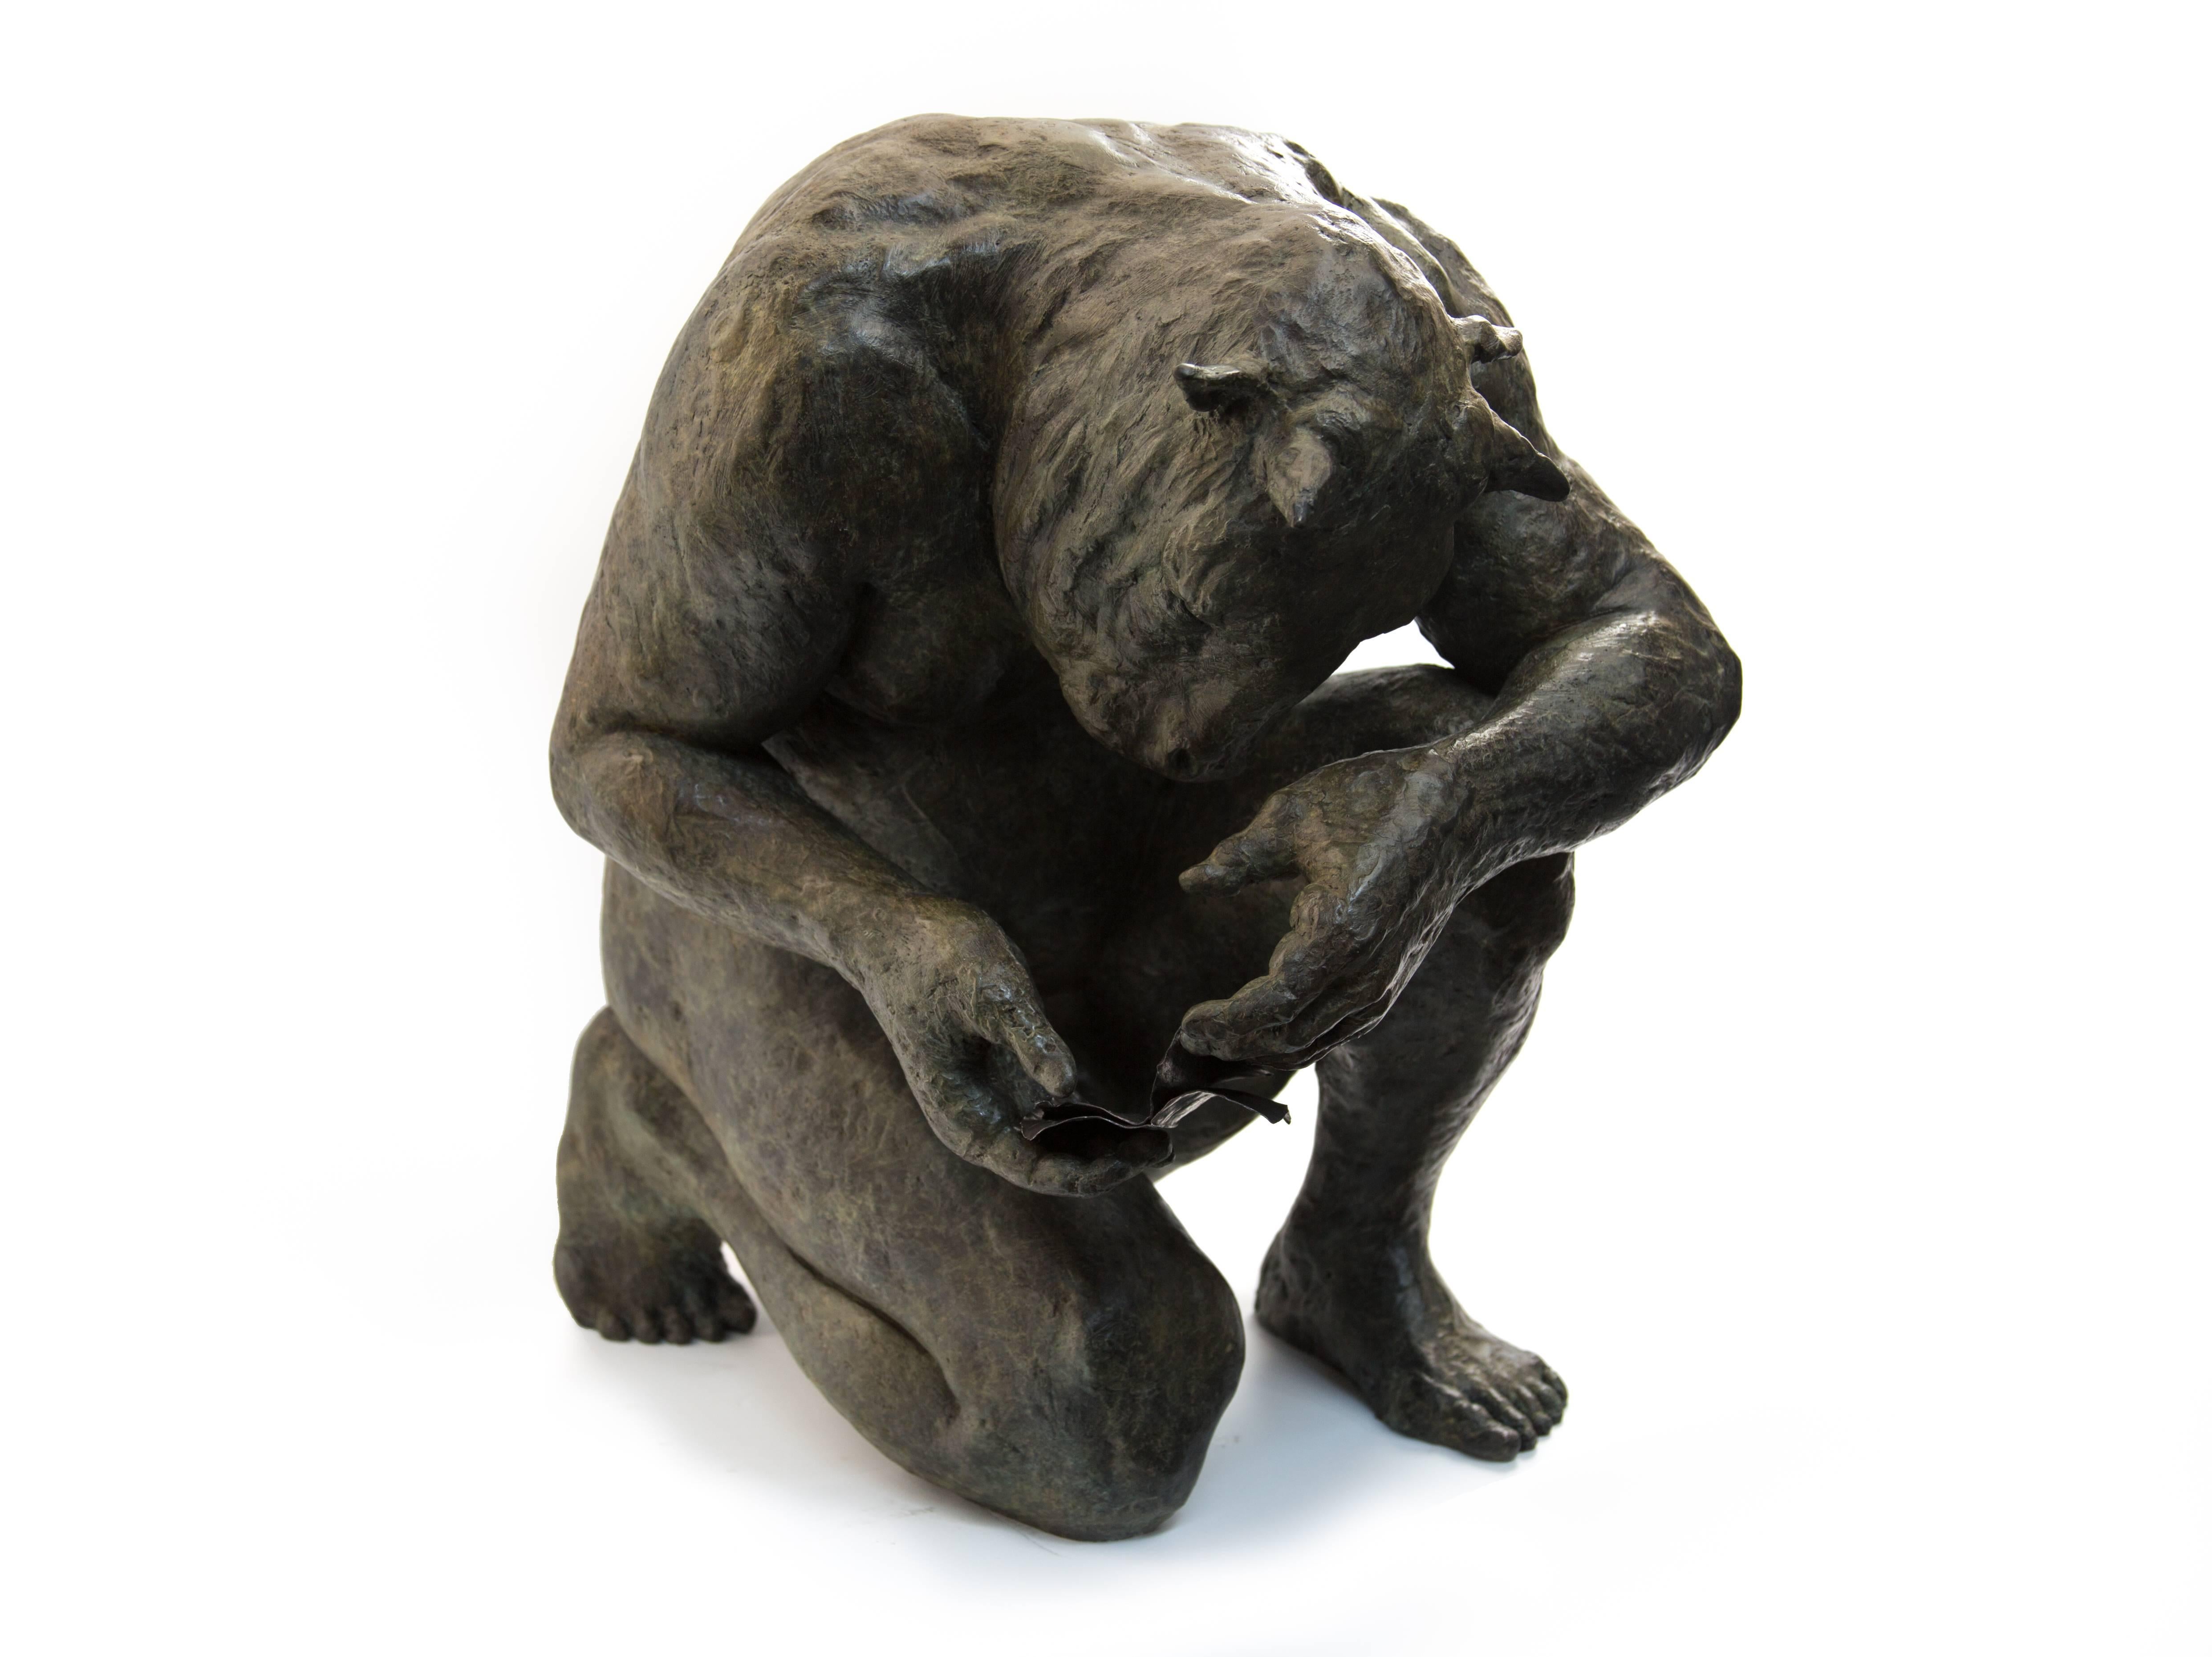 Beth Carter Nude Sculpture - Crouching Minotaur (with book)